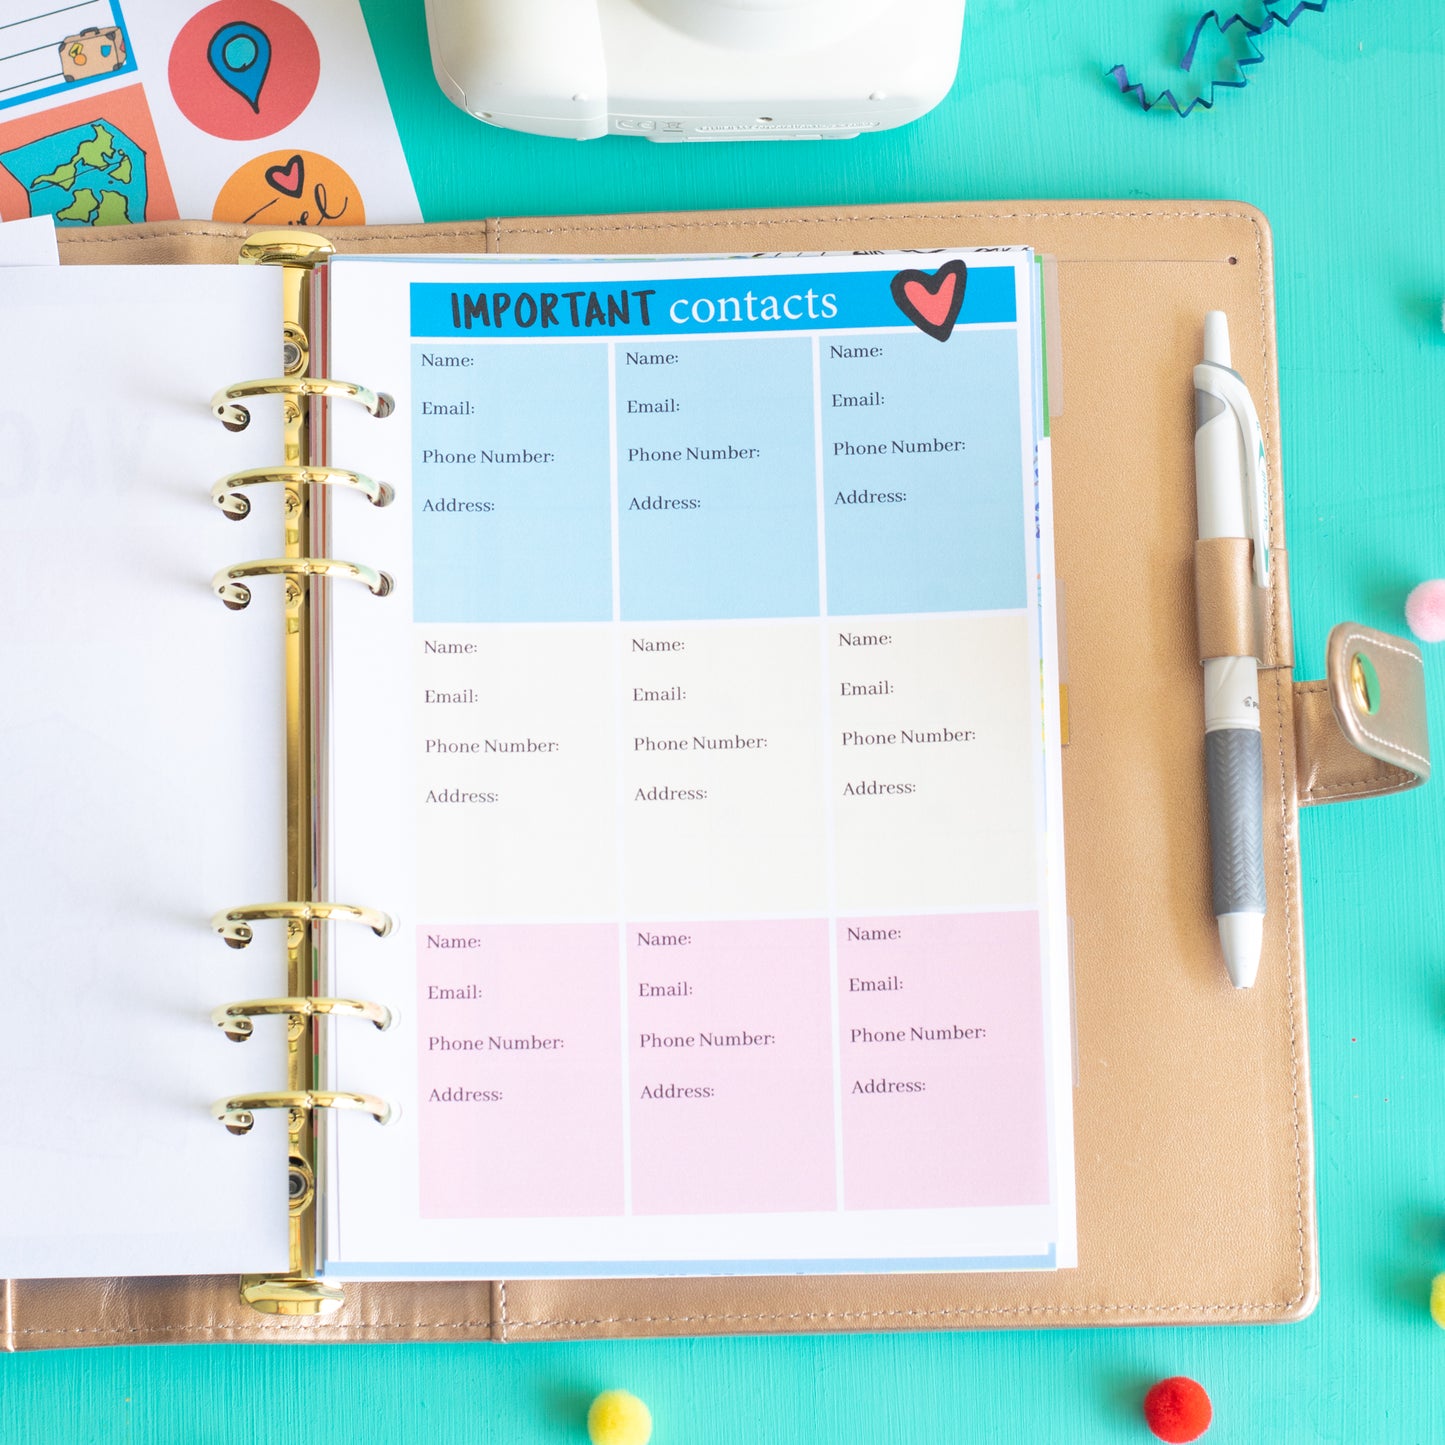 Printable A5 Vacation Planner Inserts